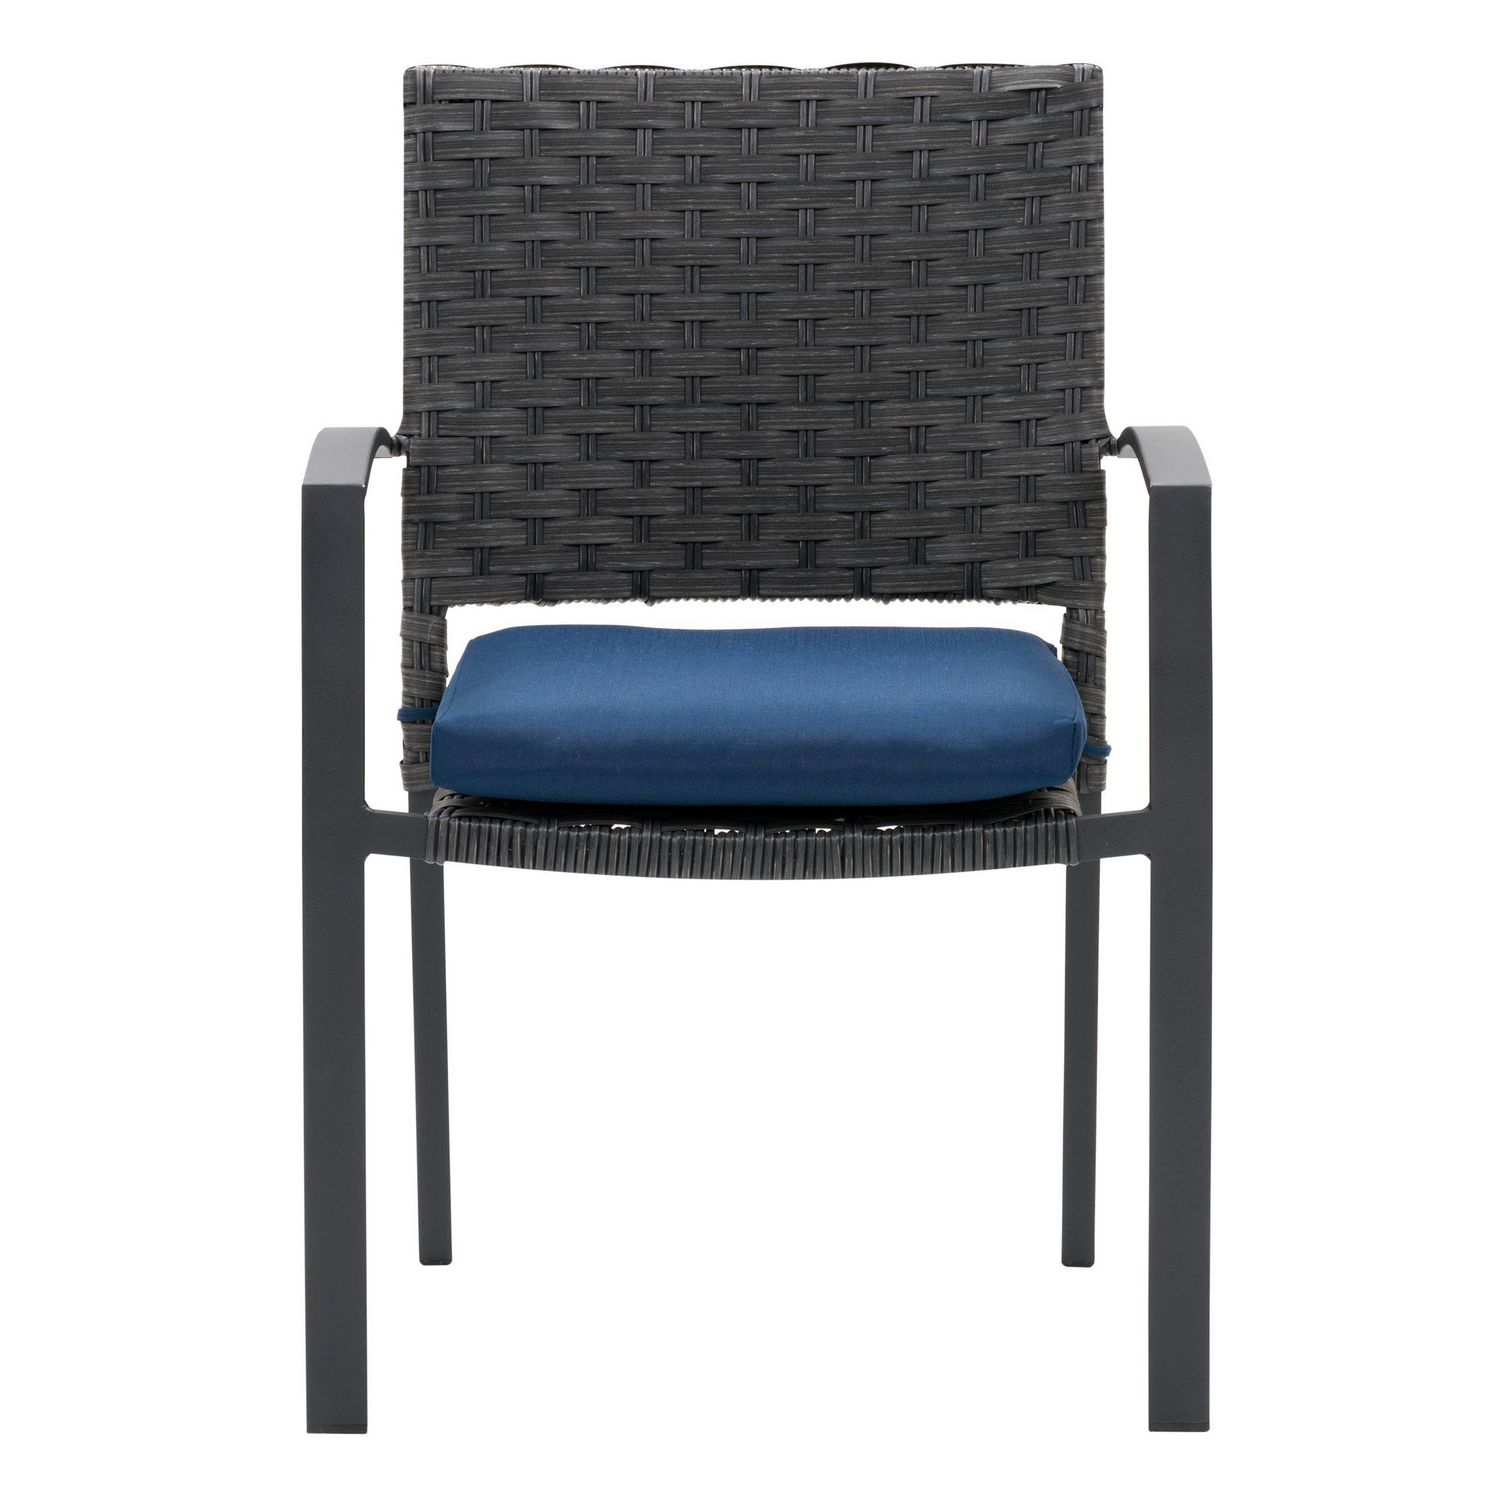 CorLiving Parkview Wide Rattan Wicker Patio Dining Chairs ...